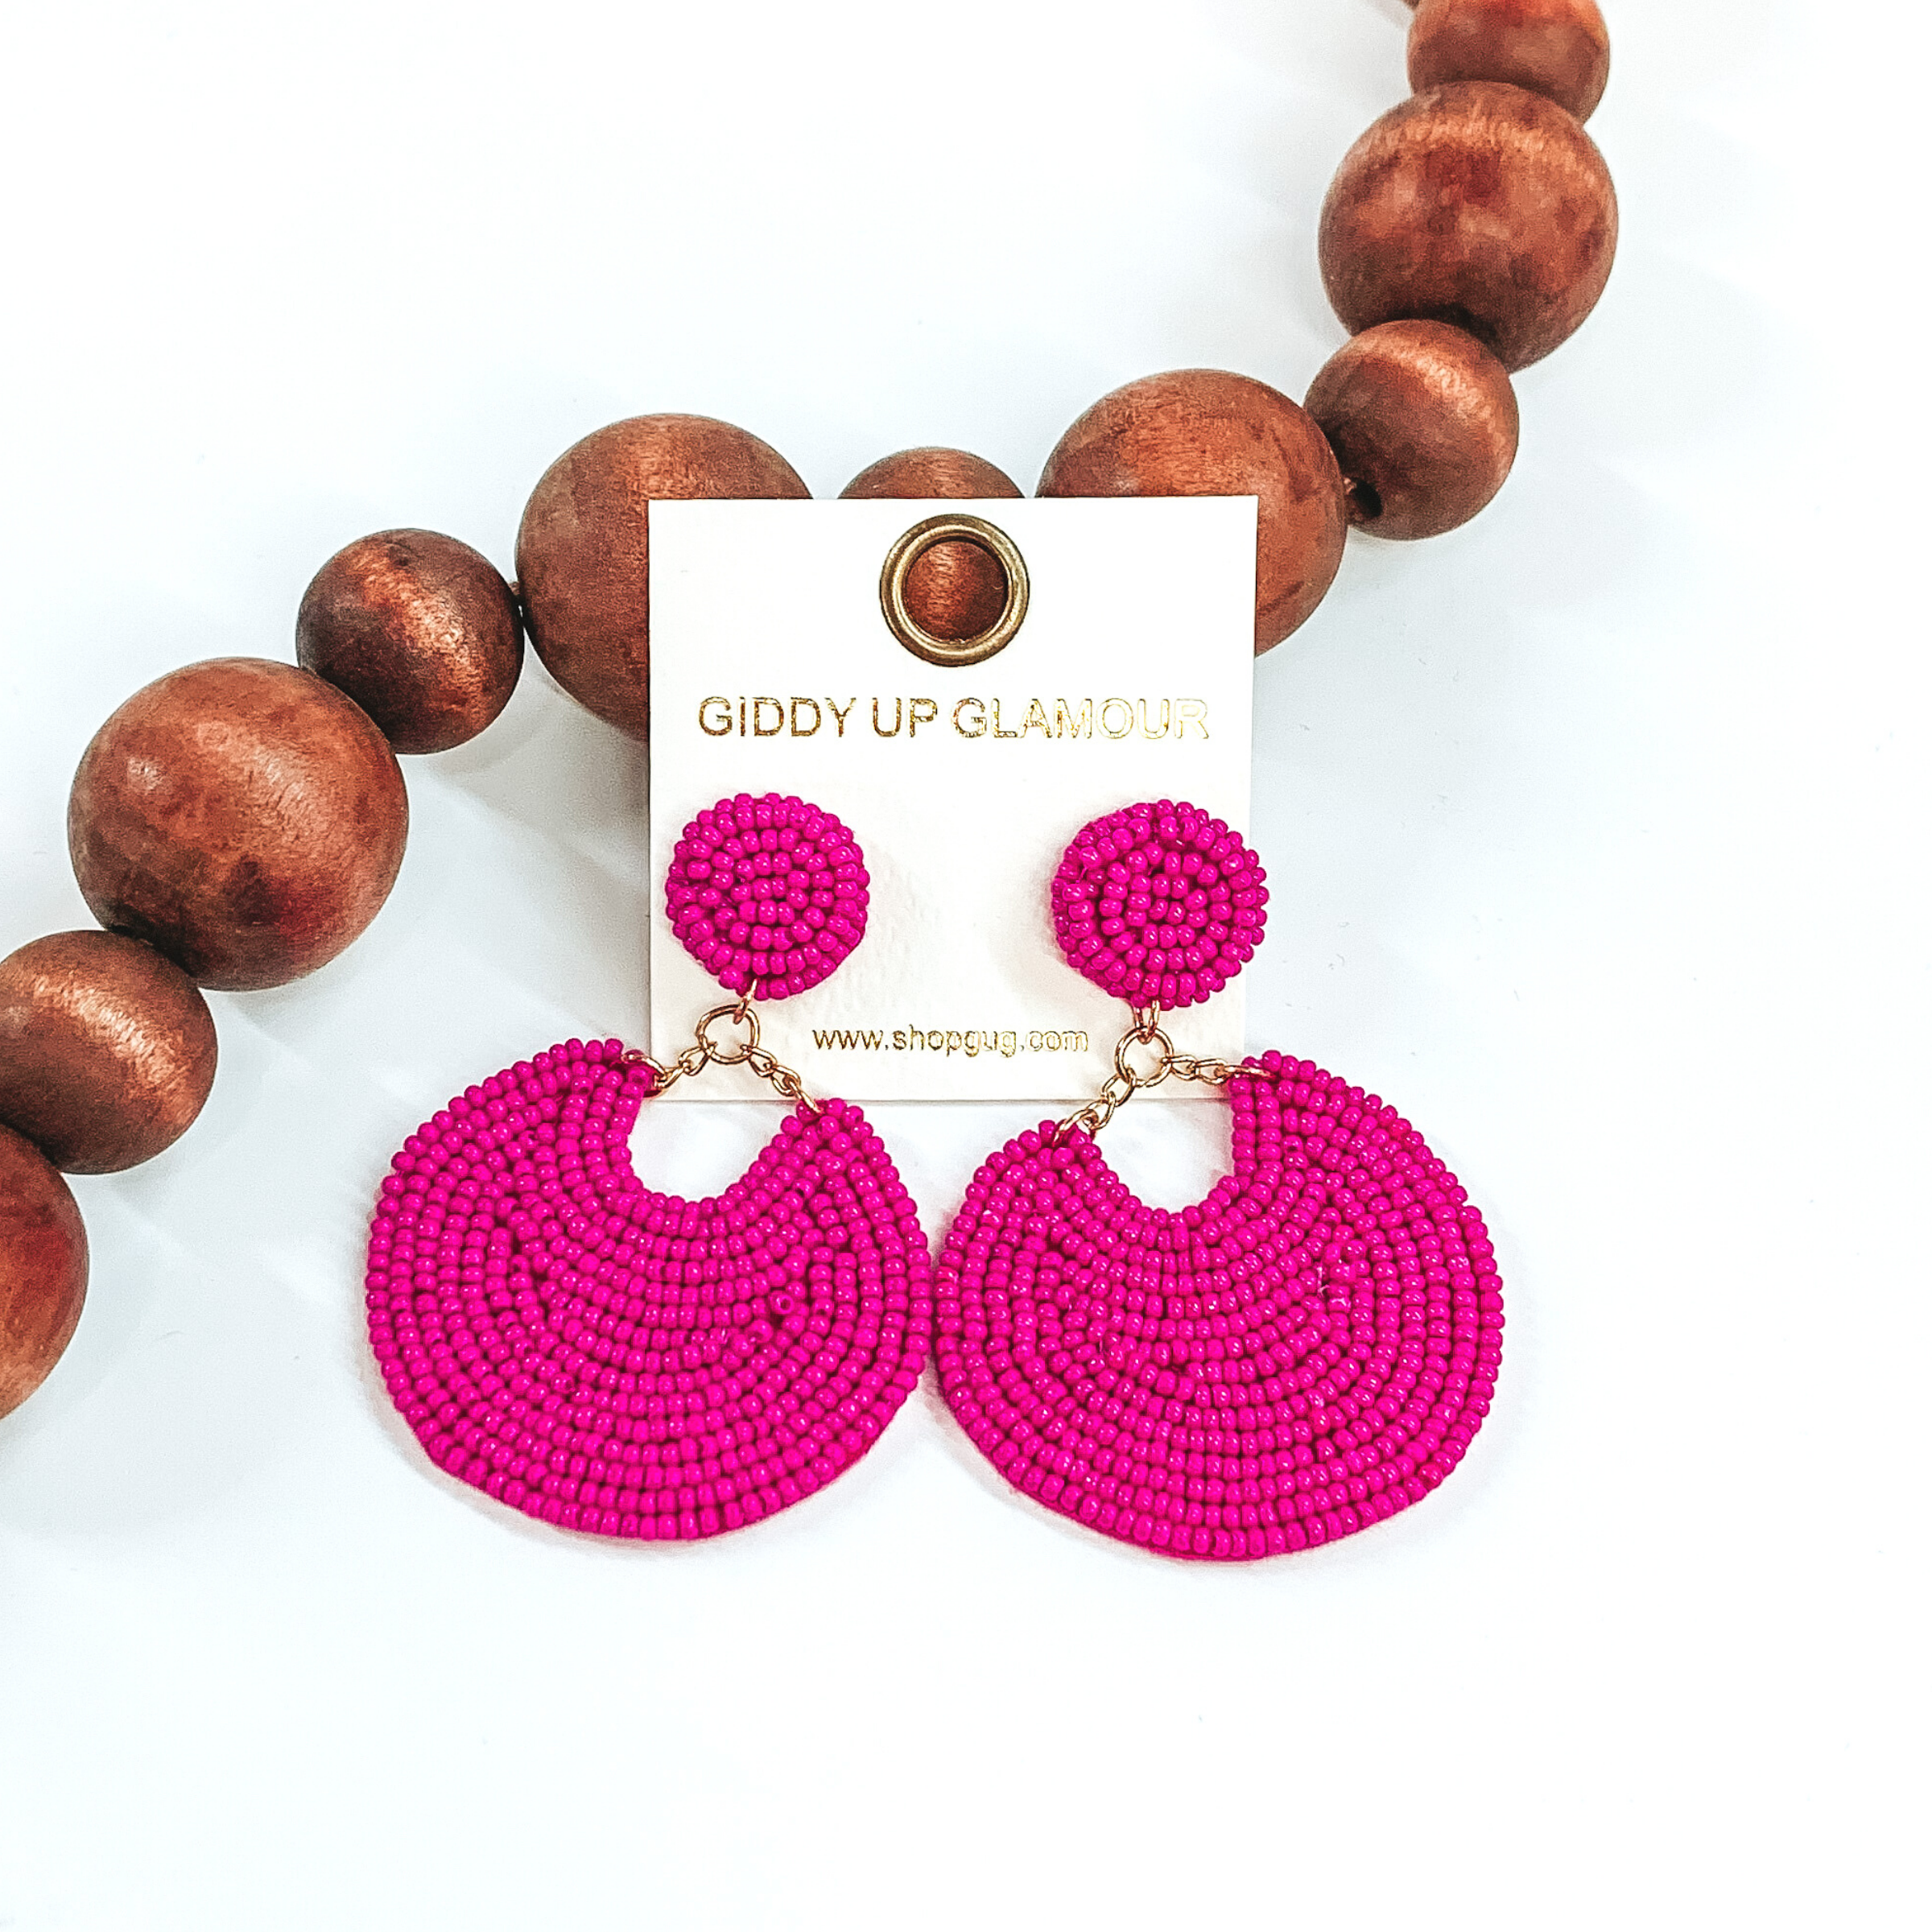 Beaded circle studs with a hanging bigger circle with a small "u" cutout. These beaded earrings in the the color fuchsia. These earrings are pictured on a white background with dark brown beads on the left side of the earrings.